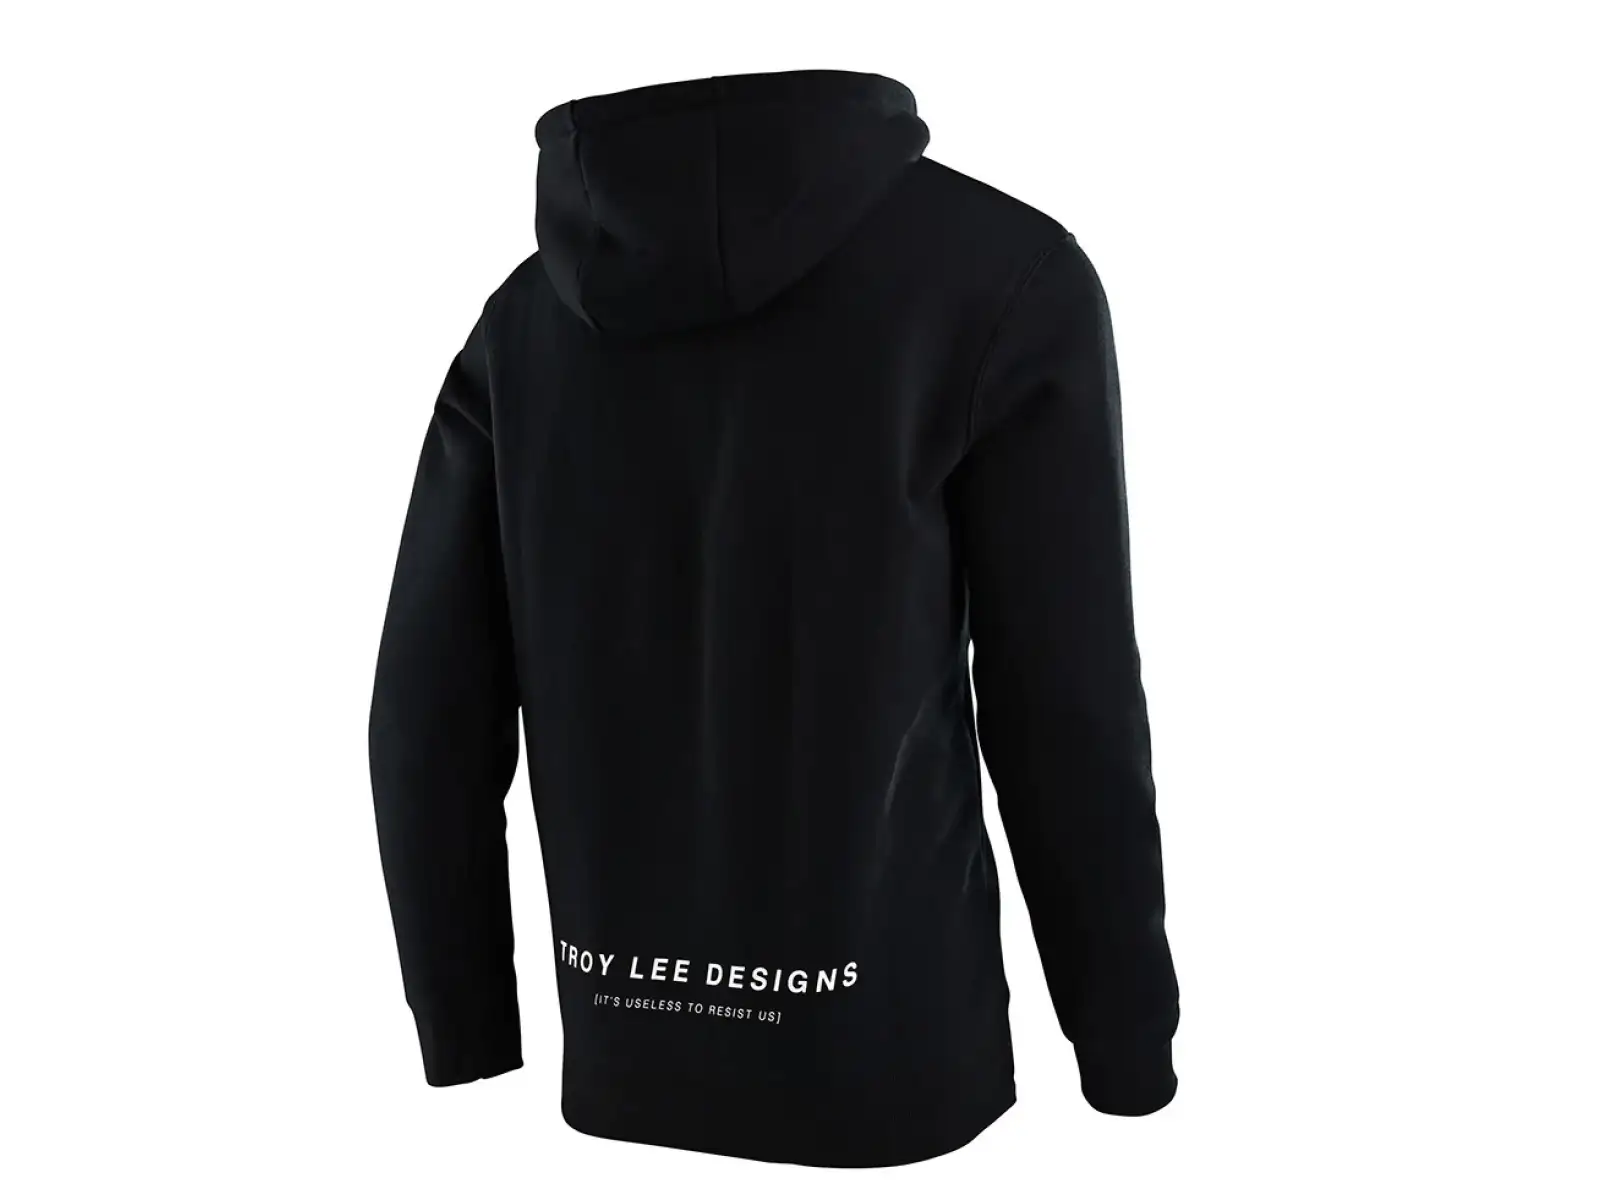 Troy Lee Designs Pullover Red Bull Rampage Lockup mikina s kapucí black